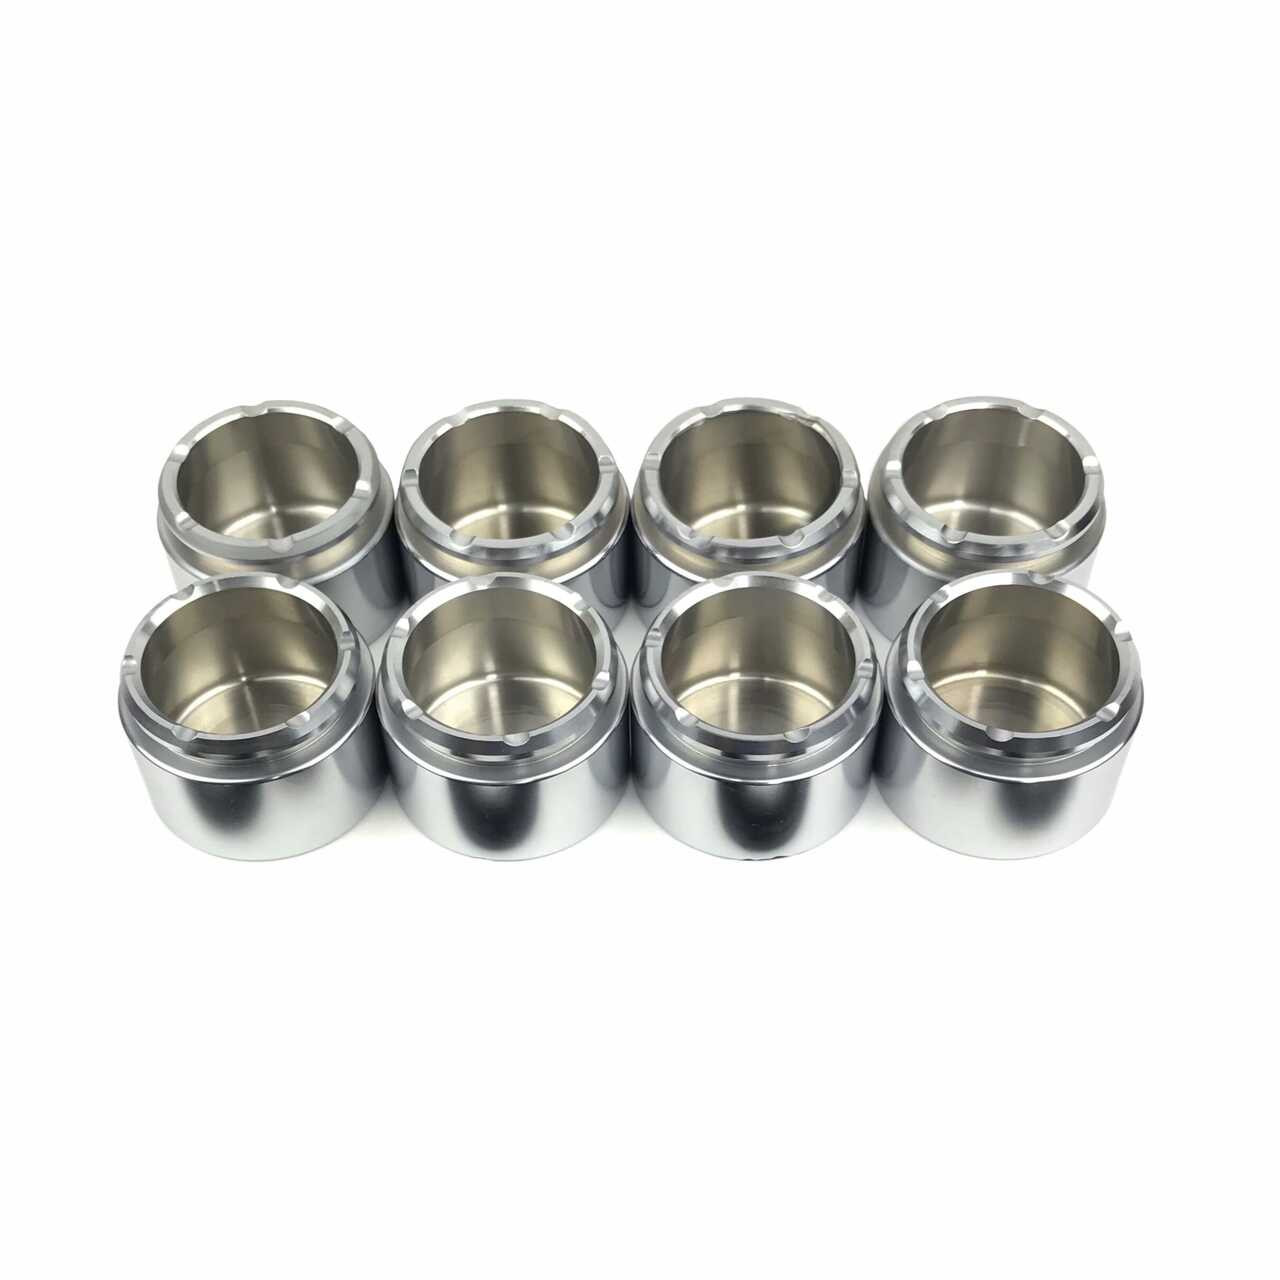 8 ea SS Pistons for 991 C2S Rear Calipers